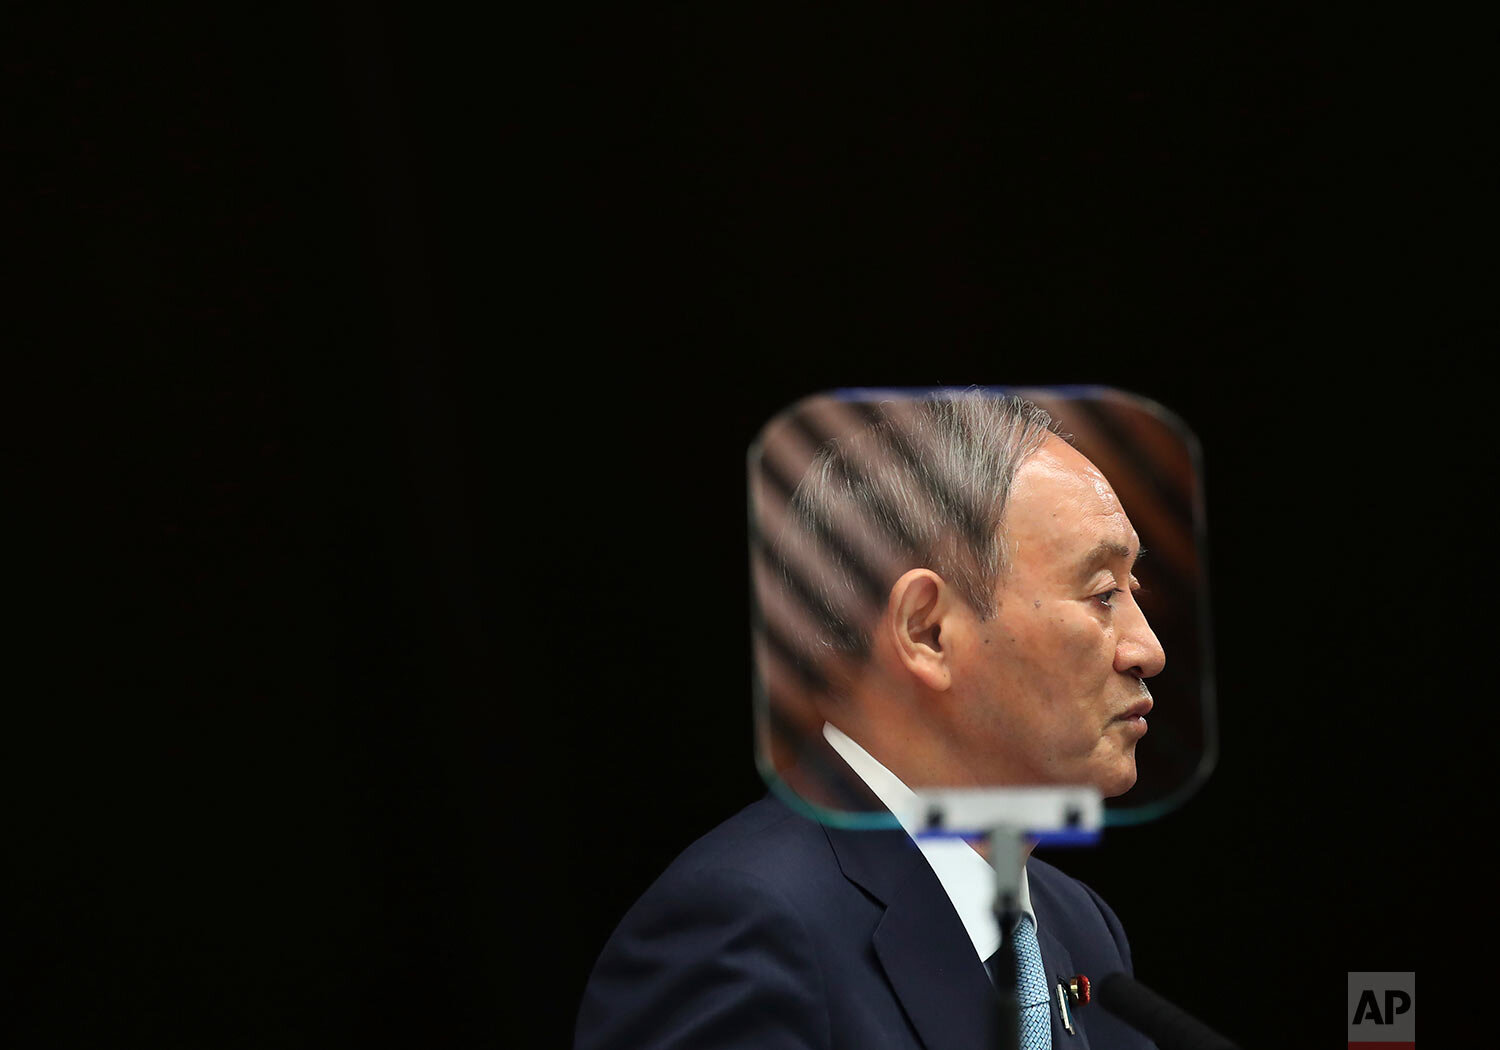  Japanese Prime Minister Yoshihide Suga is seen through a teleprompter as he speaks during his news conference at his office in Tokyo, Thursday, Sept. 9, 2021. (Kim Kyung-Hoon/Pool Photo via AP) 